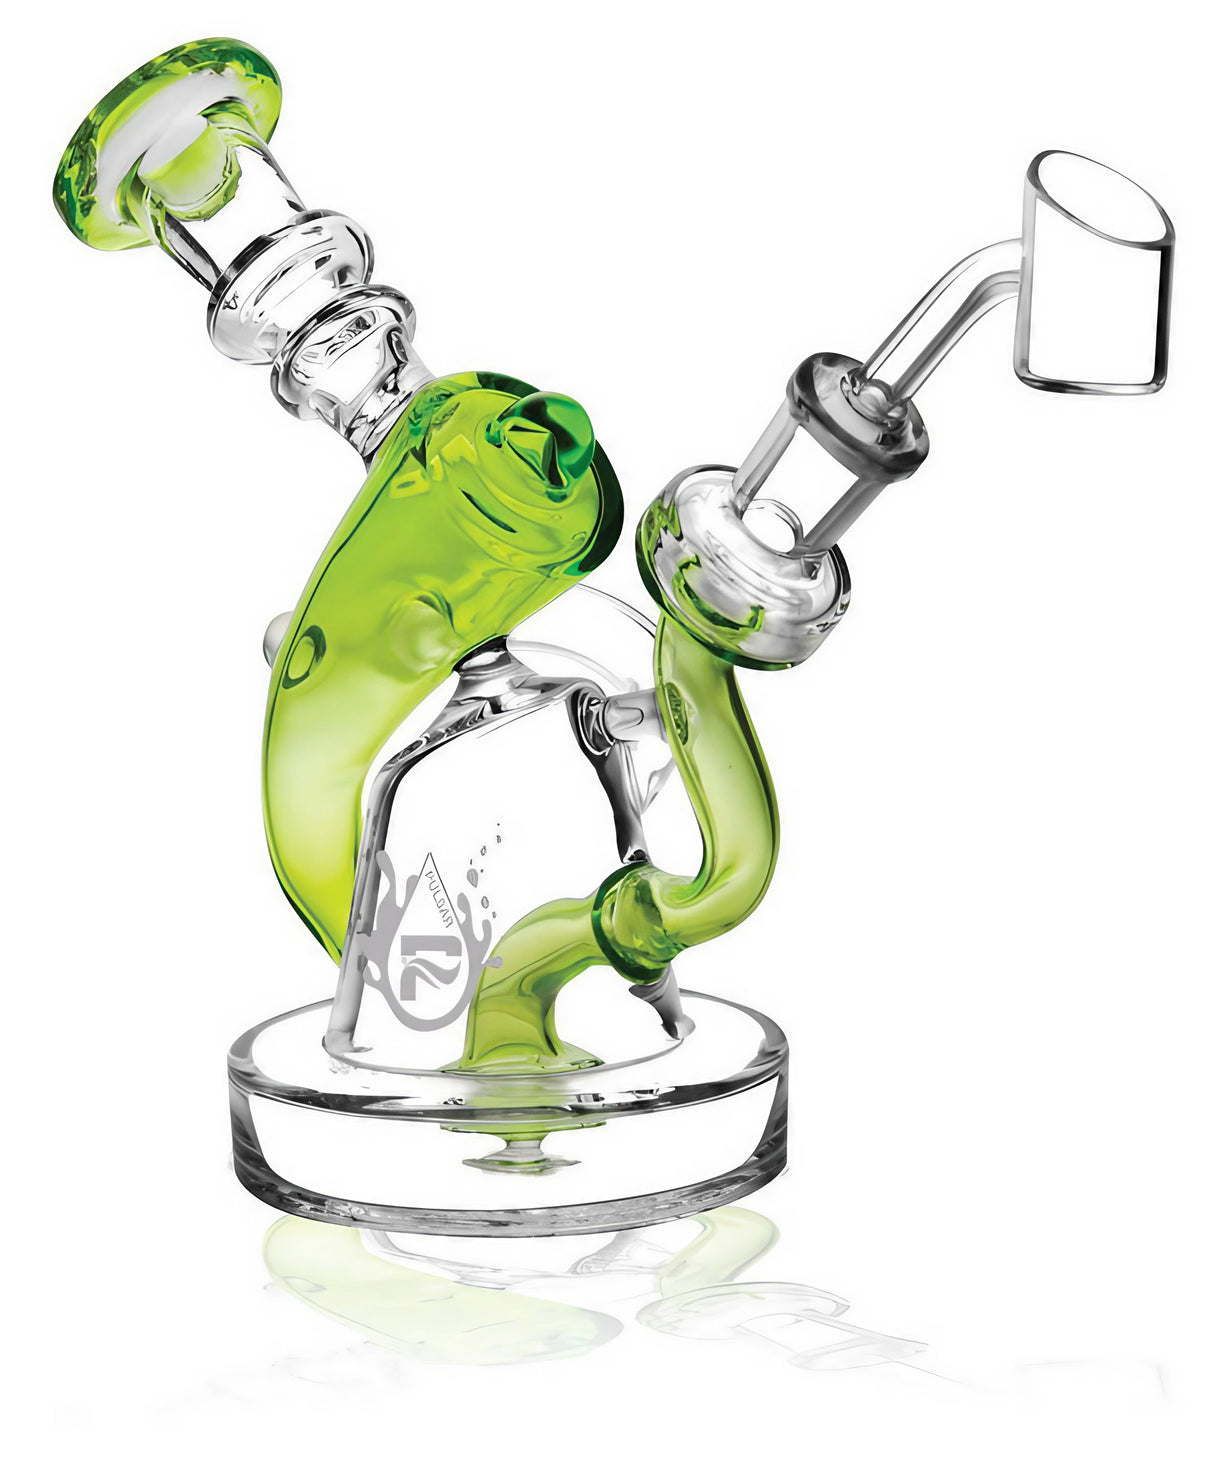 Pulsar Mini Vortex Recycler Rig in Assorted Colors with a Clear Borosilicate Glass Base